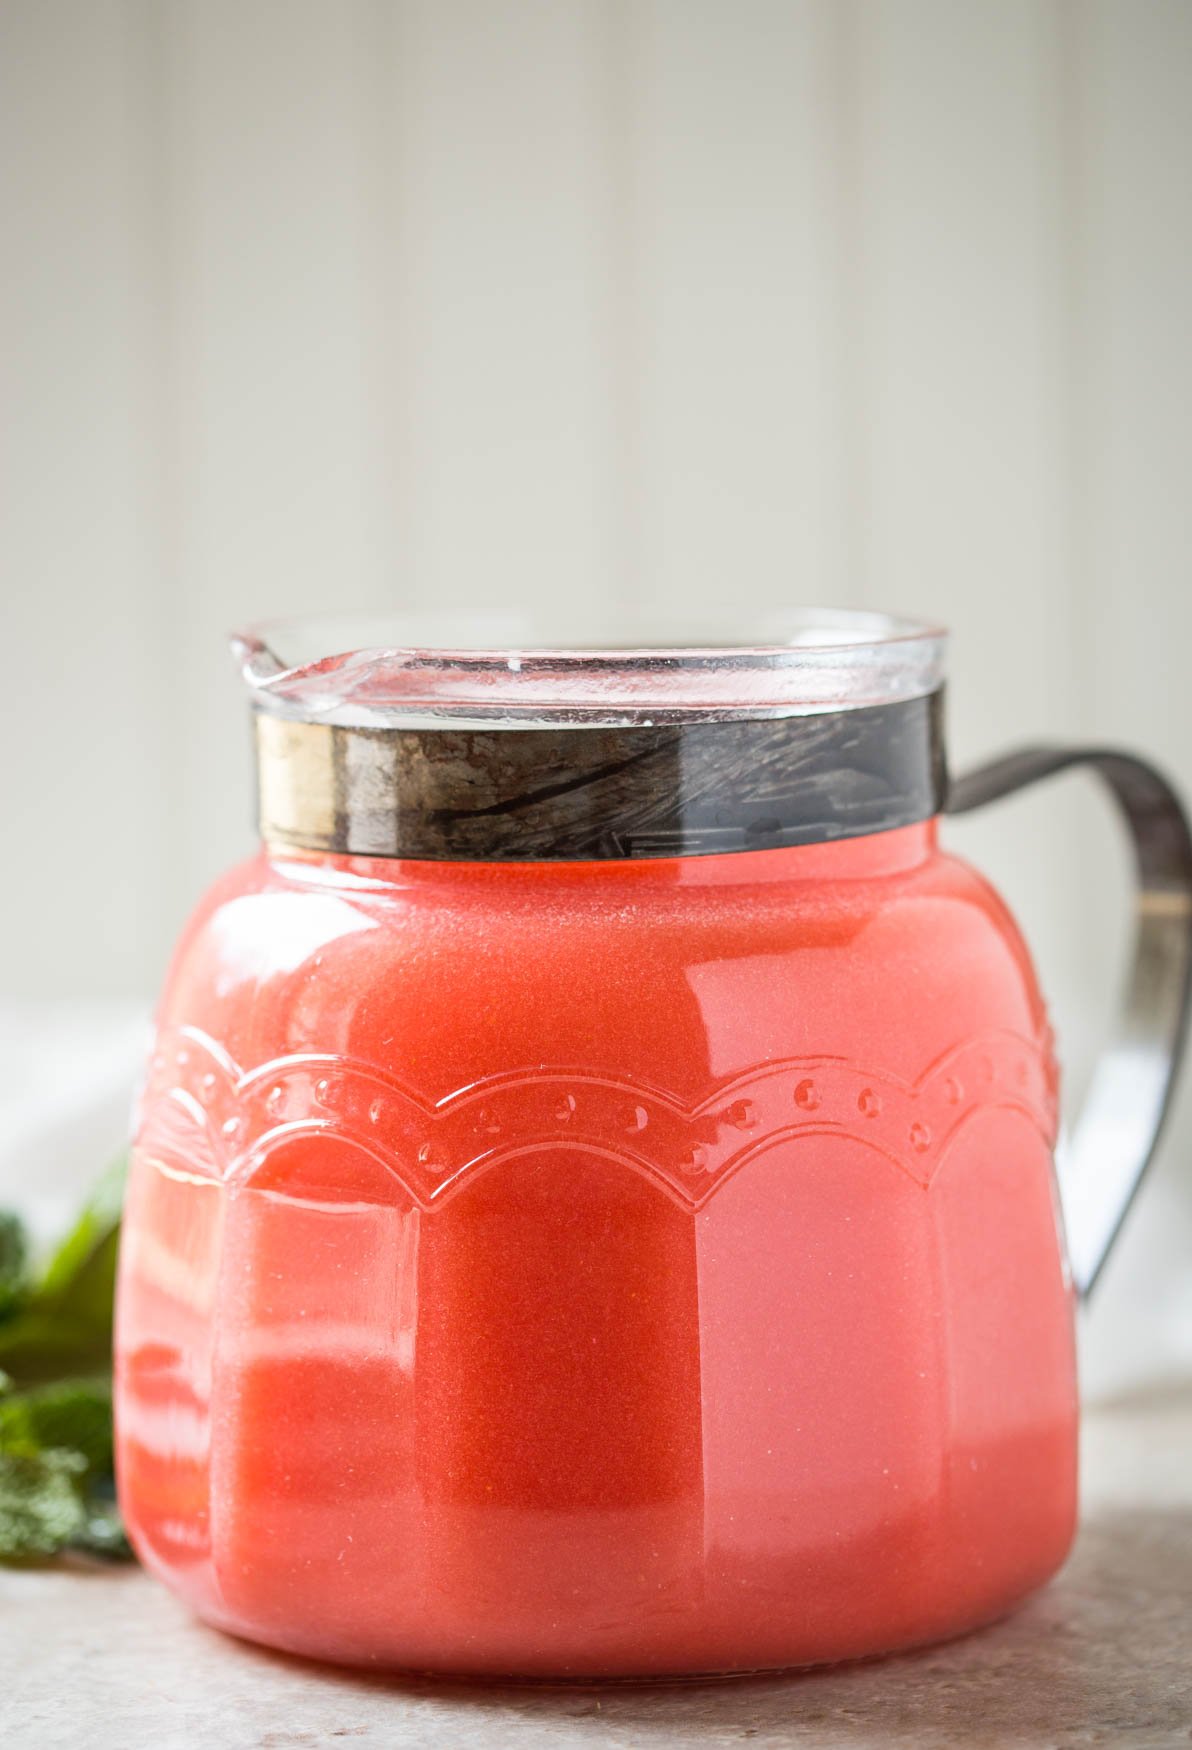 This recipe for homemade fresh strawberry lemonade is super easy to prepare in a few minutes. Perfect refreshing and cooling drink recipe to enjoy the warm days of spring and summer. | #watchwhatuwat #lemonade #summerdrink